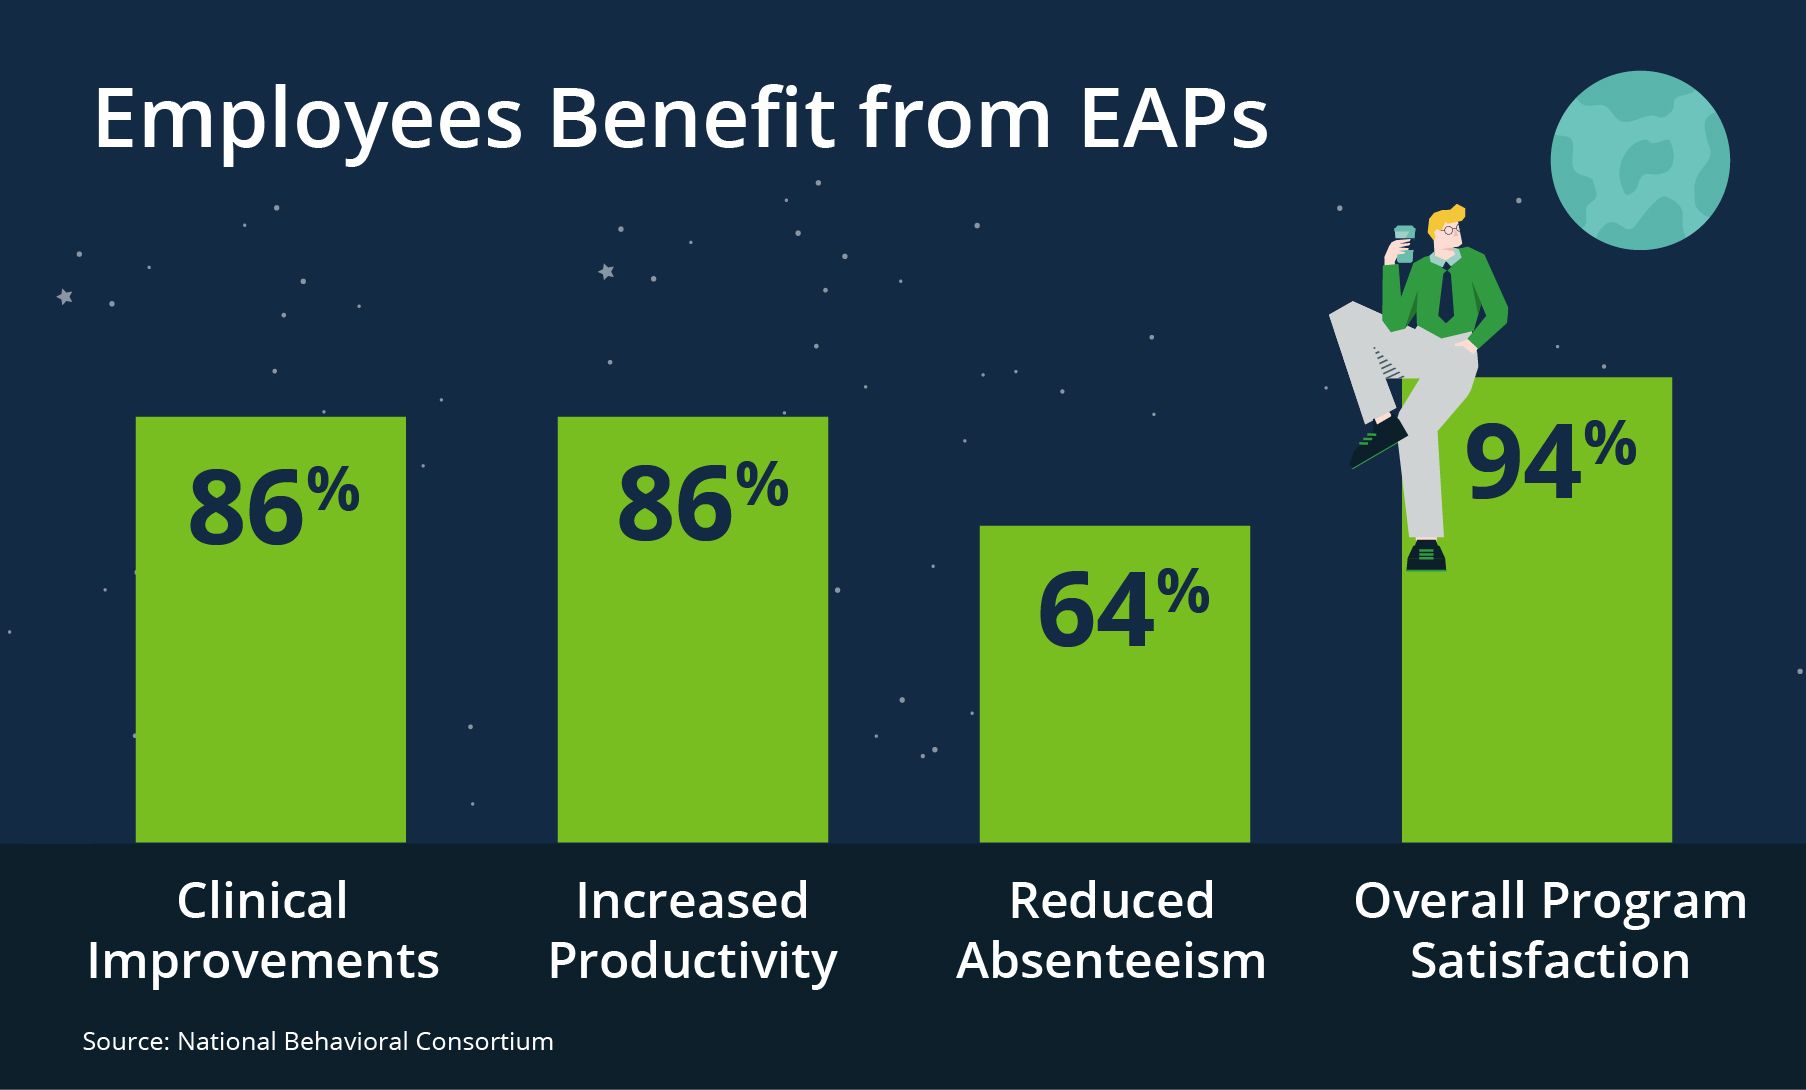 Employees benefits from EAP percentages